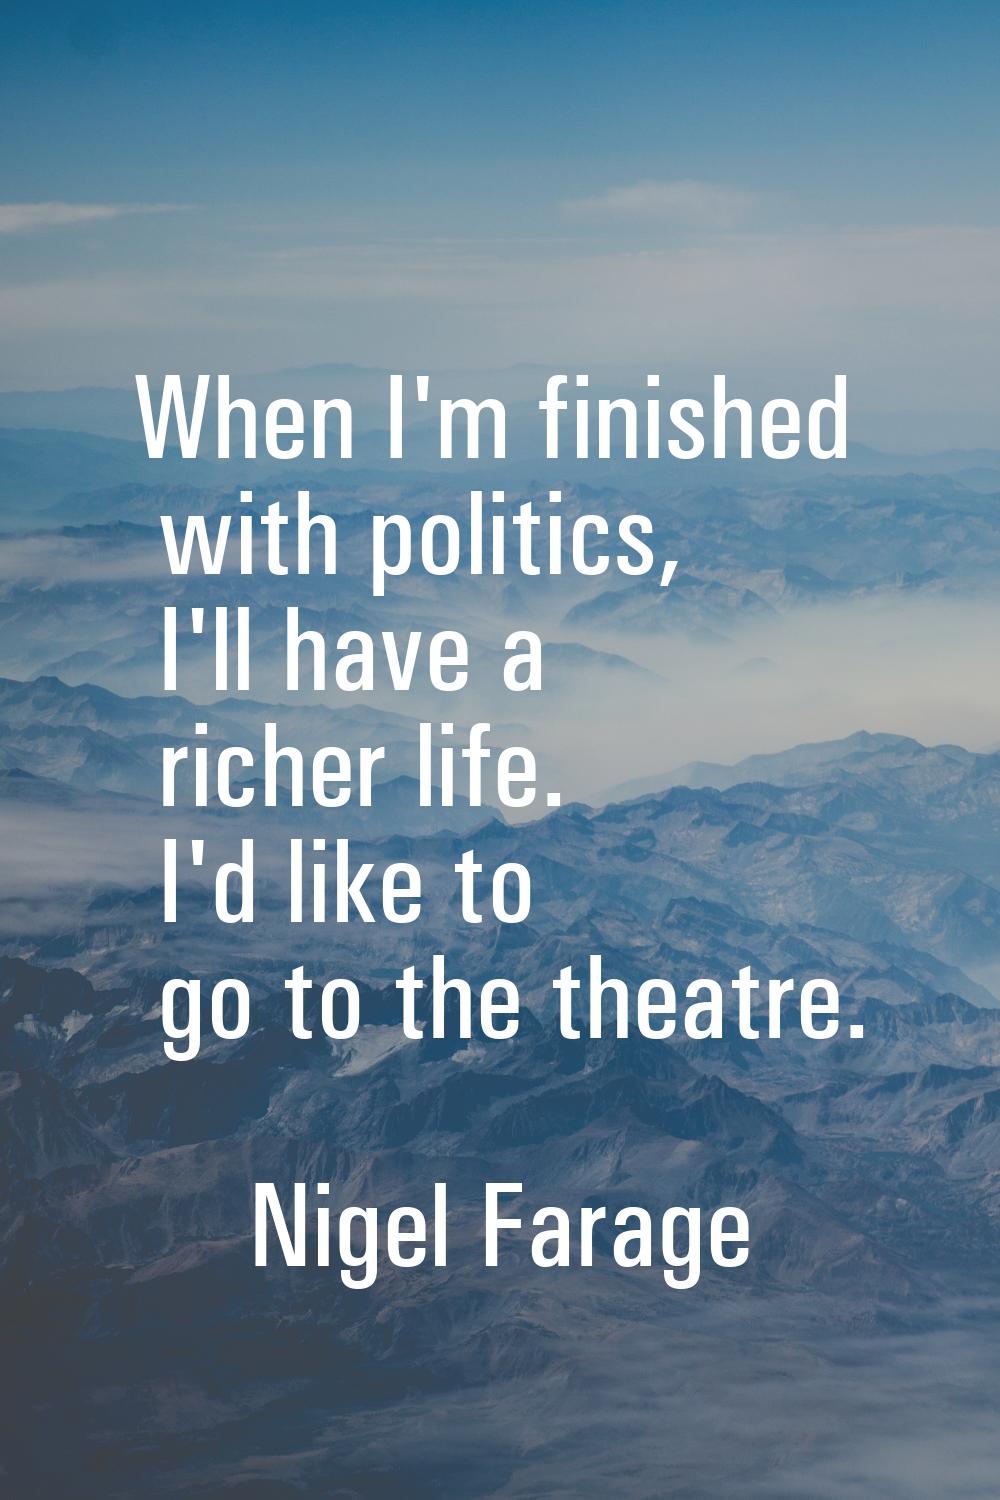 When I'm finished with politics, I'll have a richer life. I'd like to go to the theatre.